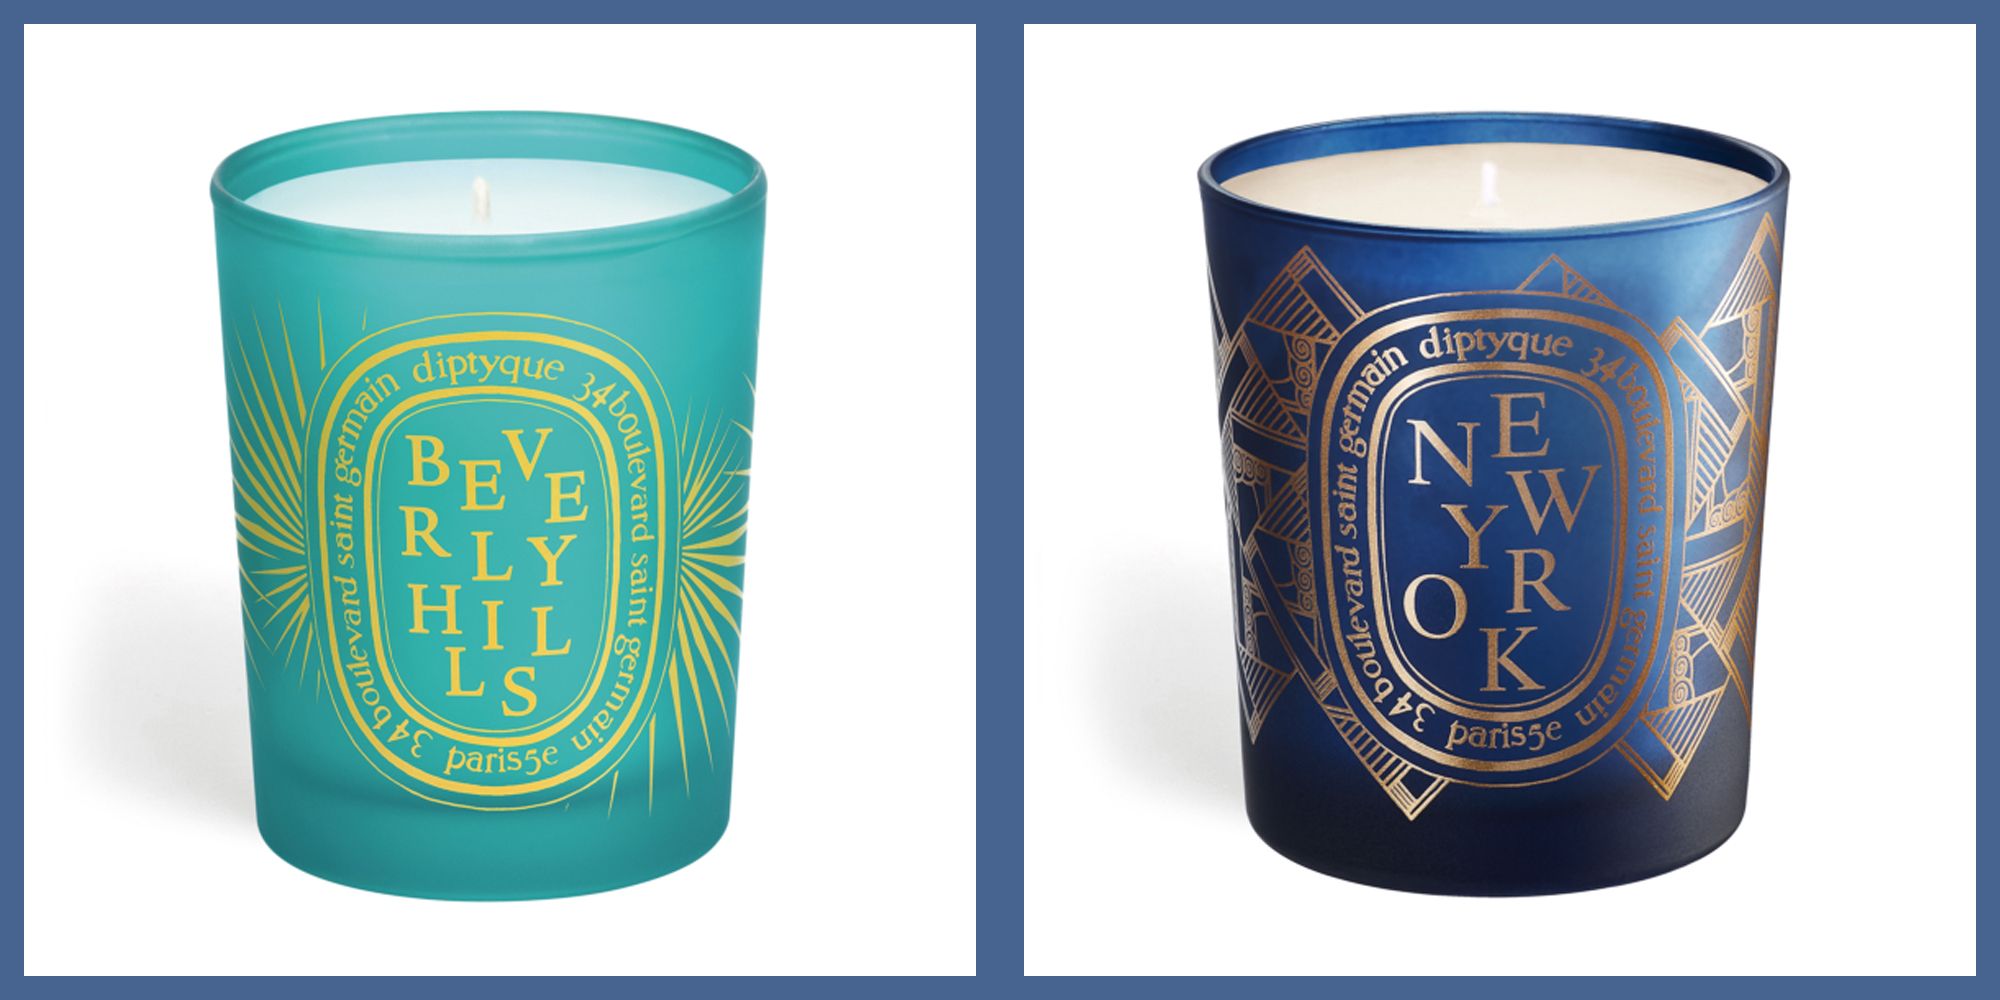 Diptyque is Relaunching its Popular City Candles for One Week Only